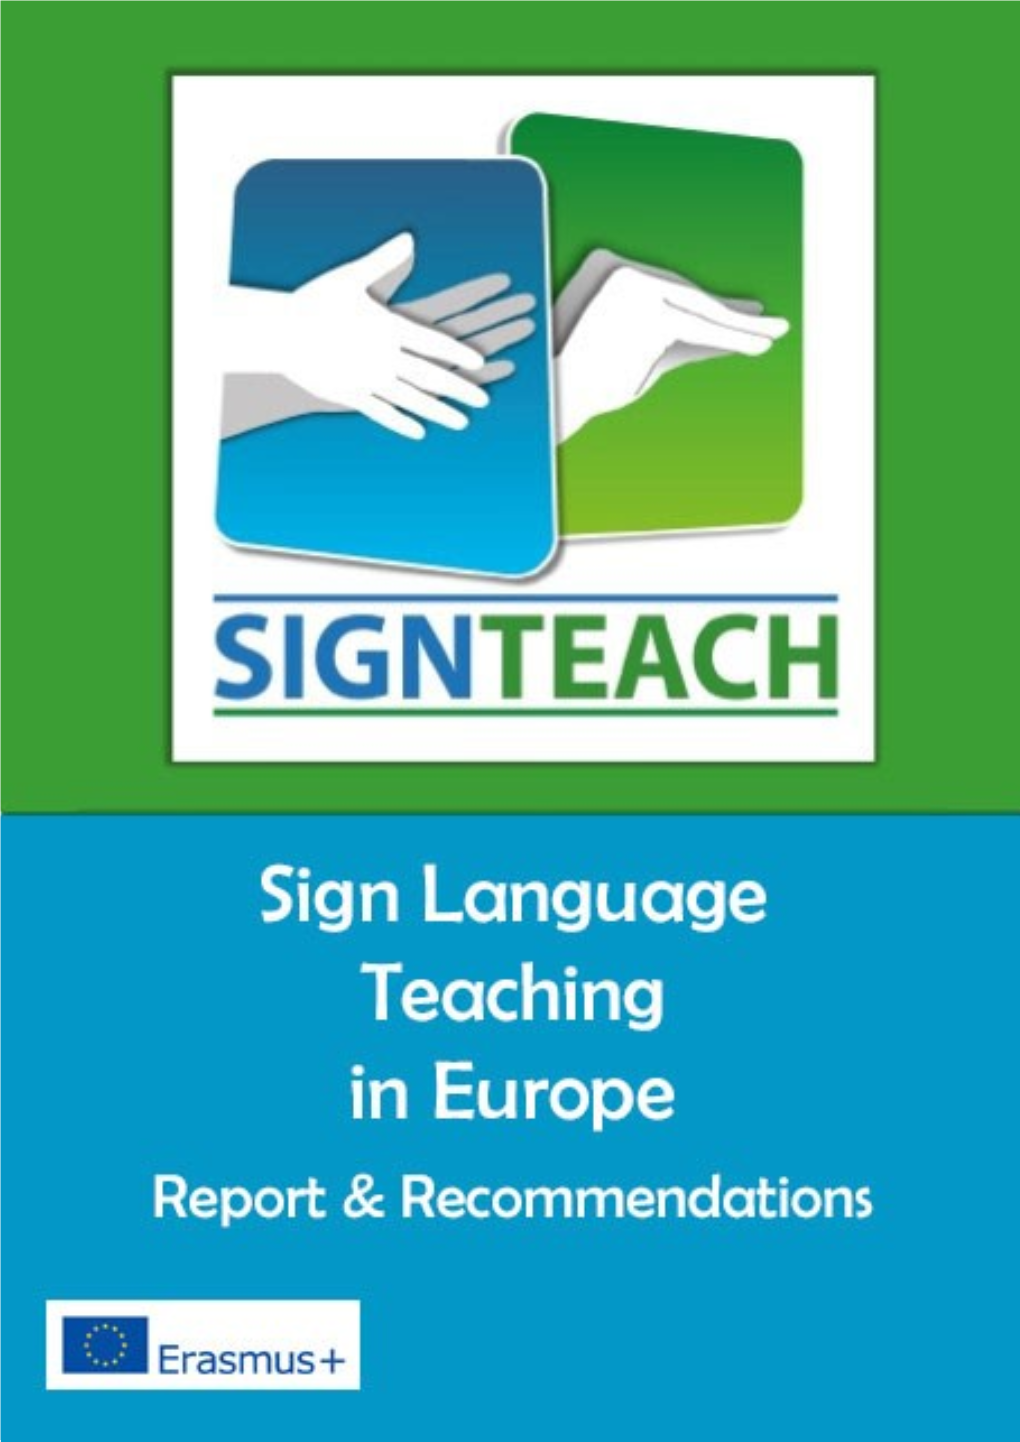 Deaf Sign Language Teachers Have a Standard Like the CERF and a Are Native Signers and Learned to Sign Be- Platform to Exchange Our Views/ Fore Their Fourth Birthday